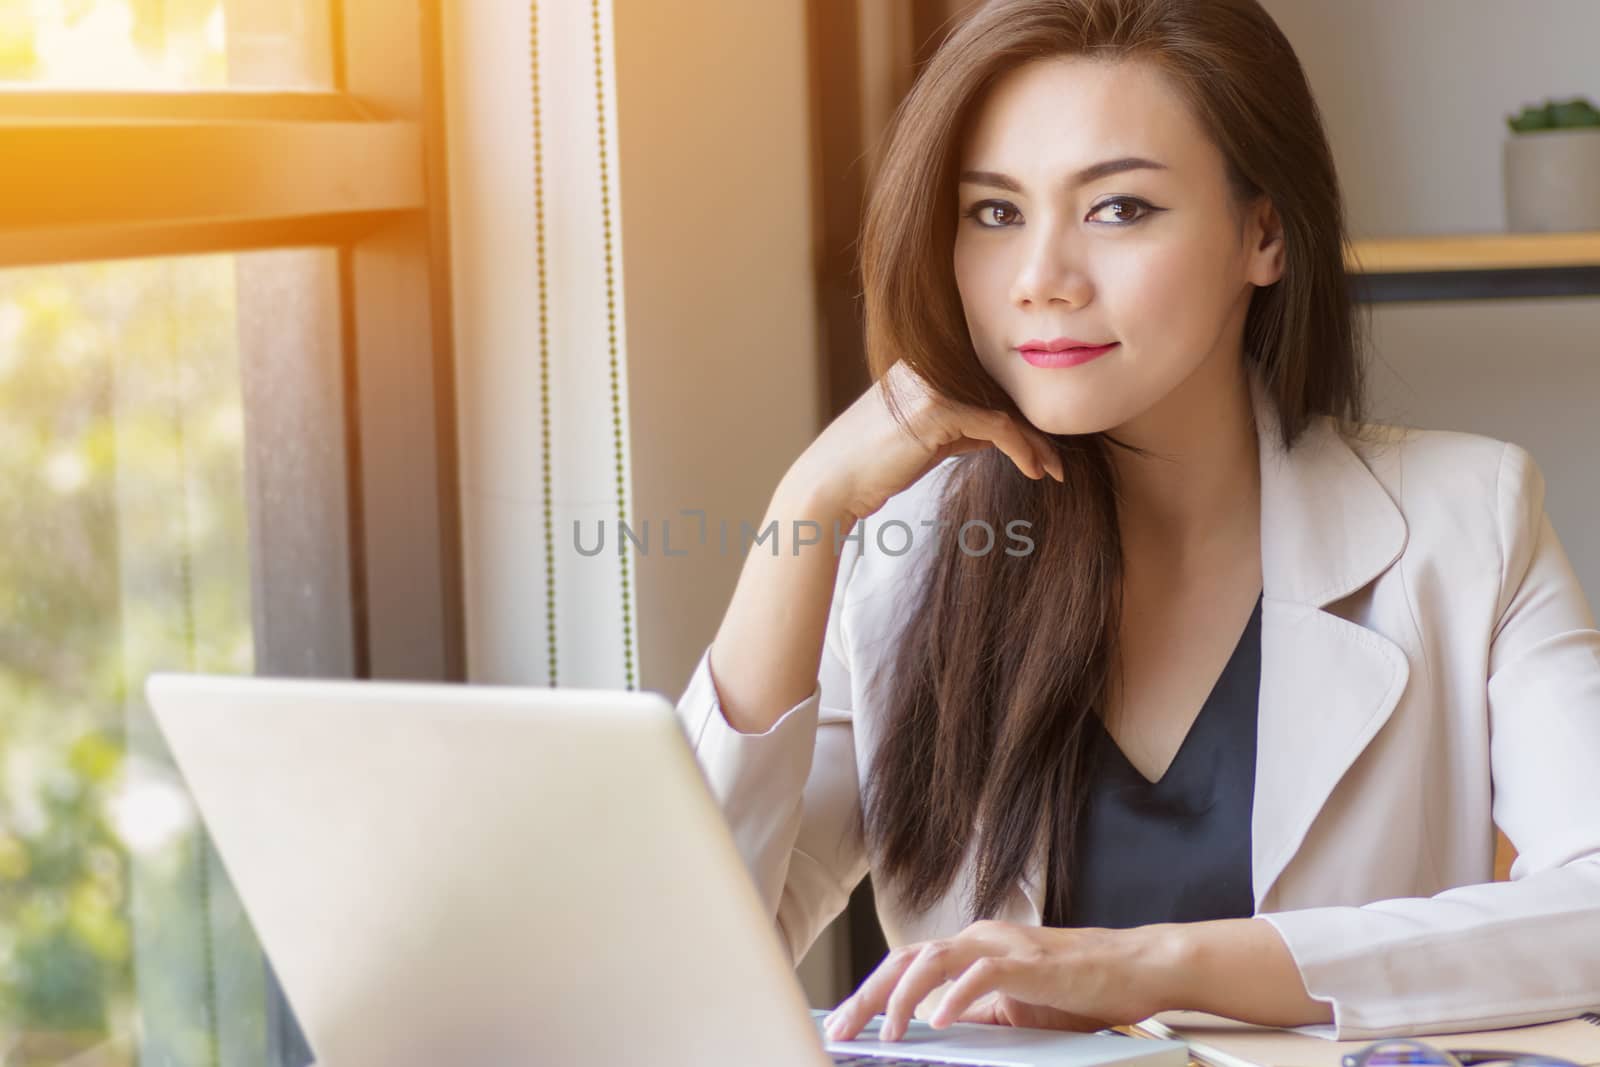 startup business in Asia concept. focused young Asian business woman with thinking face working with laptop at workplace looking at camera, film effect and sun flare effect.